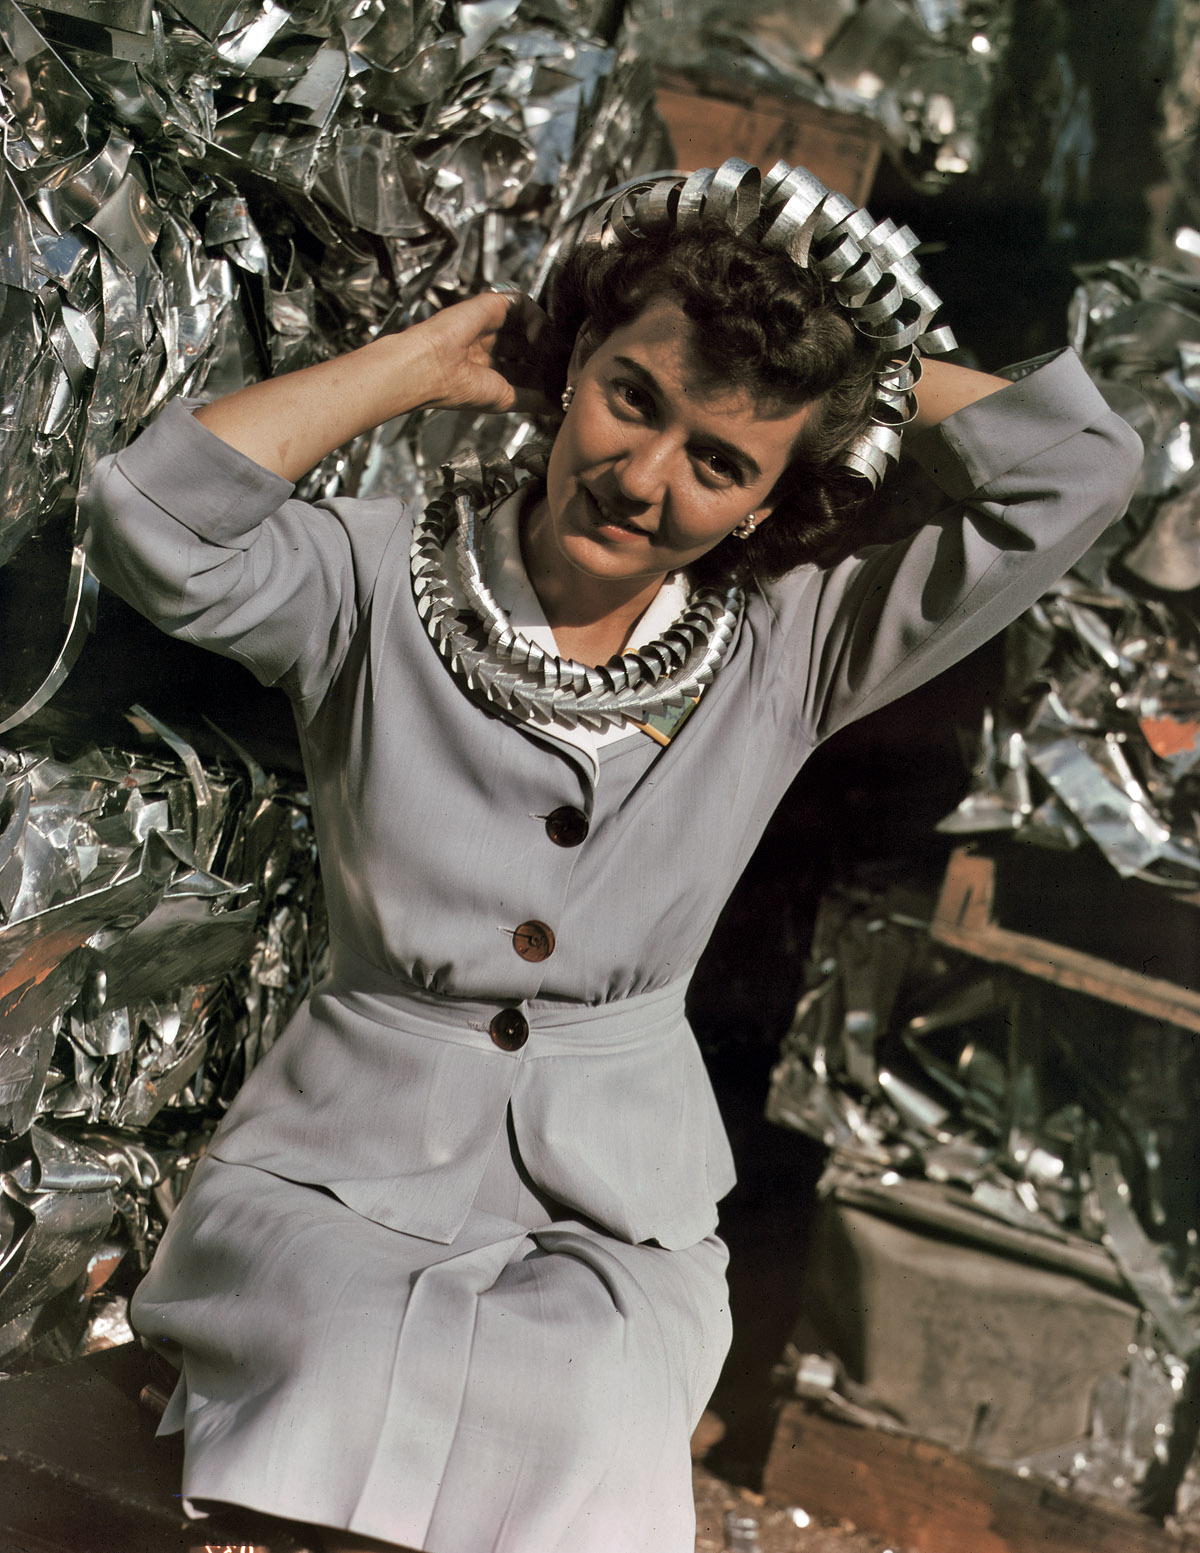 October 1942. "Salvage queen Annette del Sur, an office employee at Douglas Aircraft, Long Beach, California, with aluminum scraps collected at the plant." 4x5 Kodachrome transparency by Alfred Palmer. View full size.